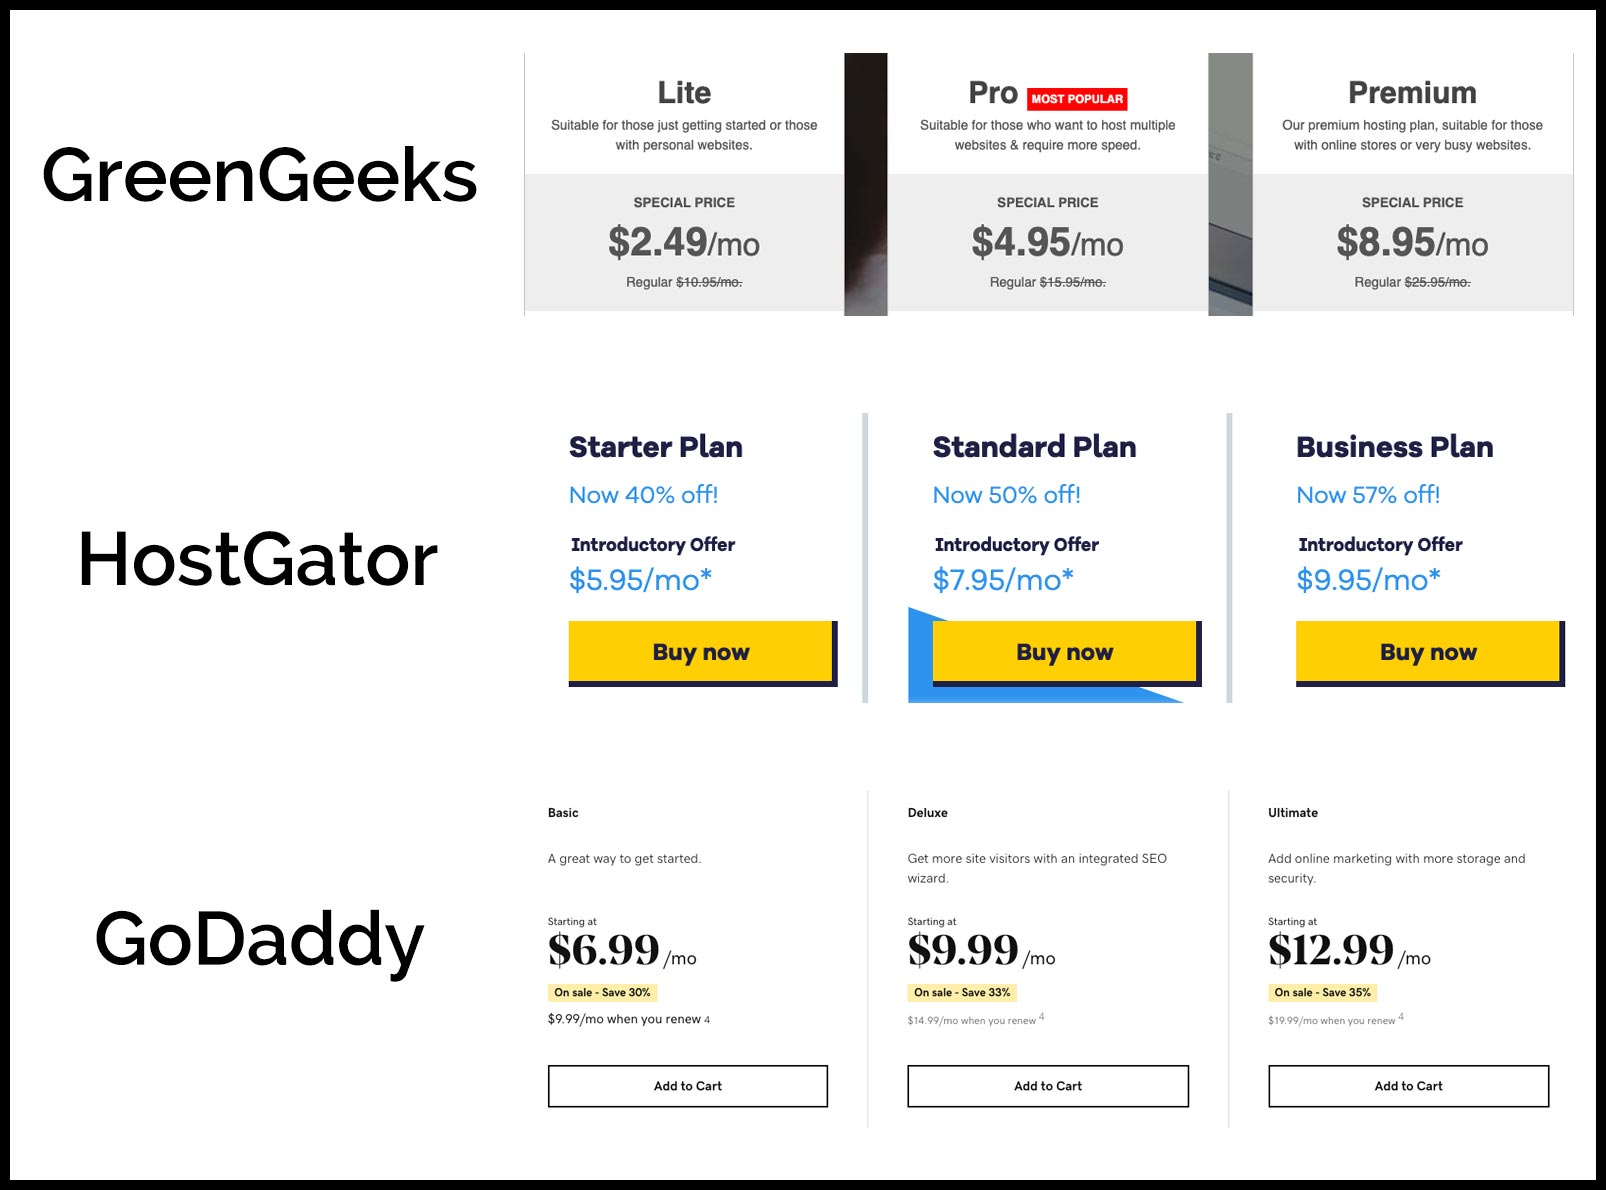 Screenshot comparing the monthly intro rates for GreenGeeks, a green web hosting site compared to HostGator and GoDaddy